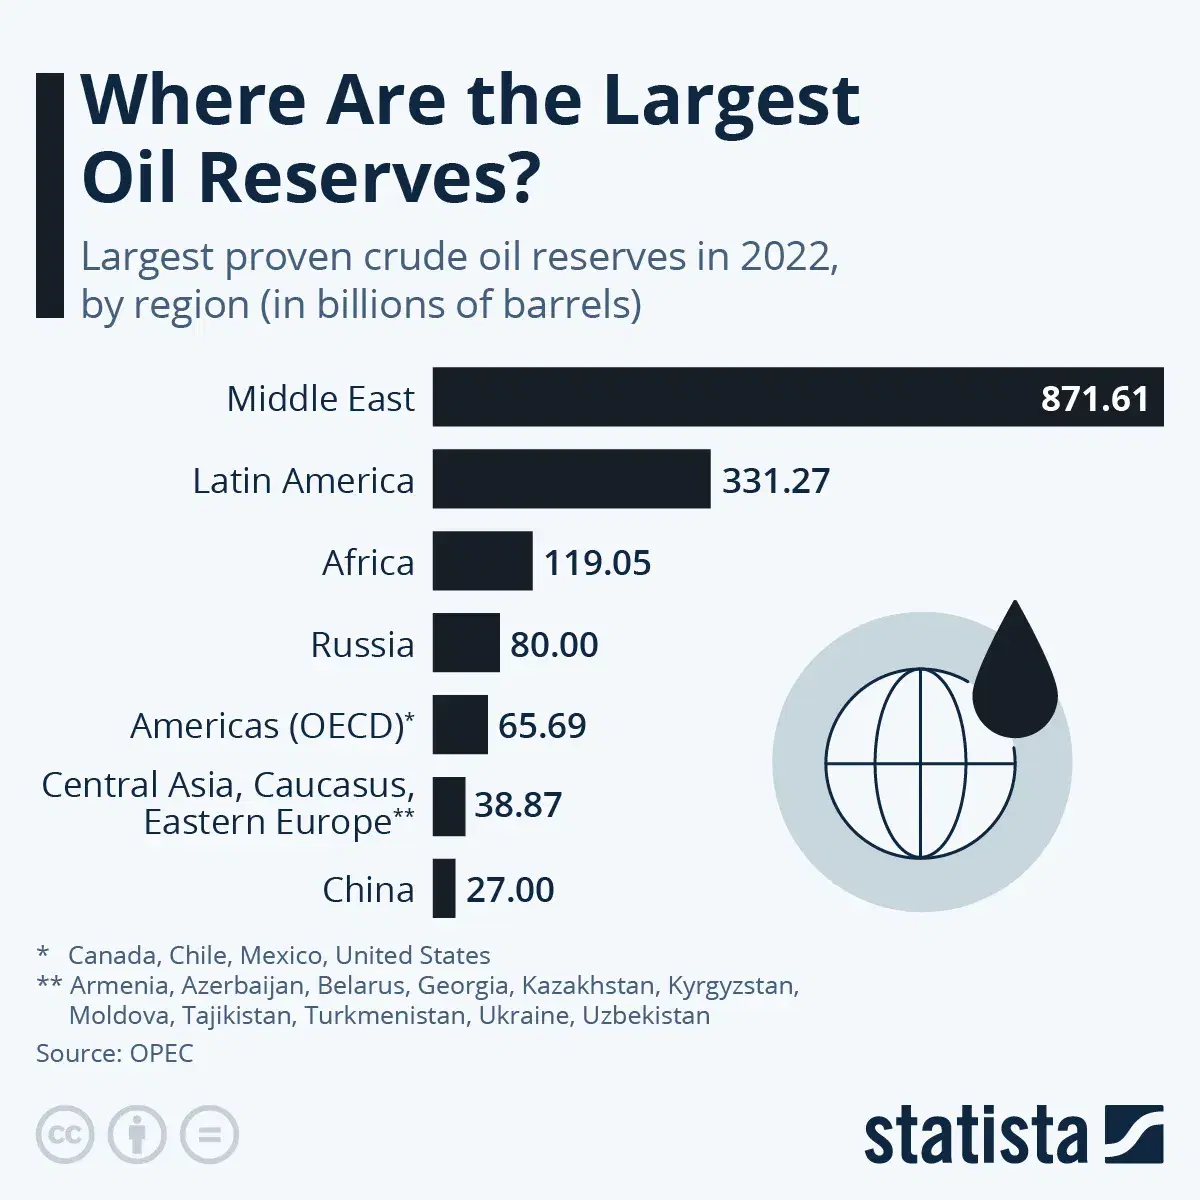 Where Are the Largest Oil Reserves?